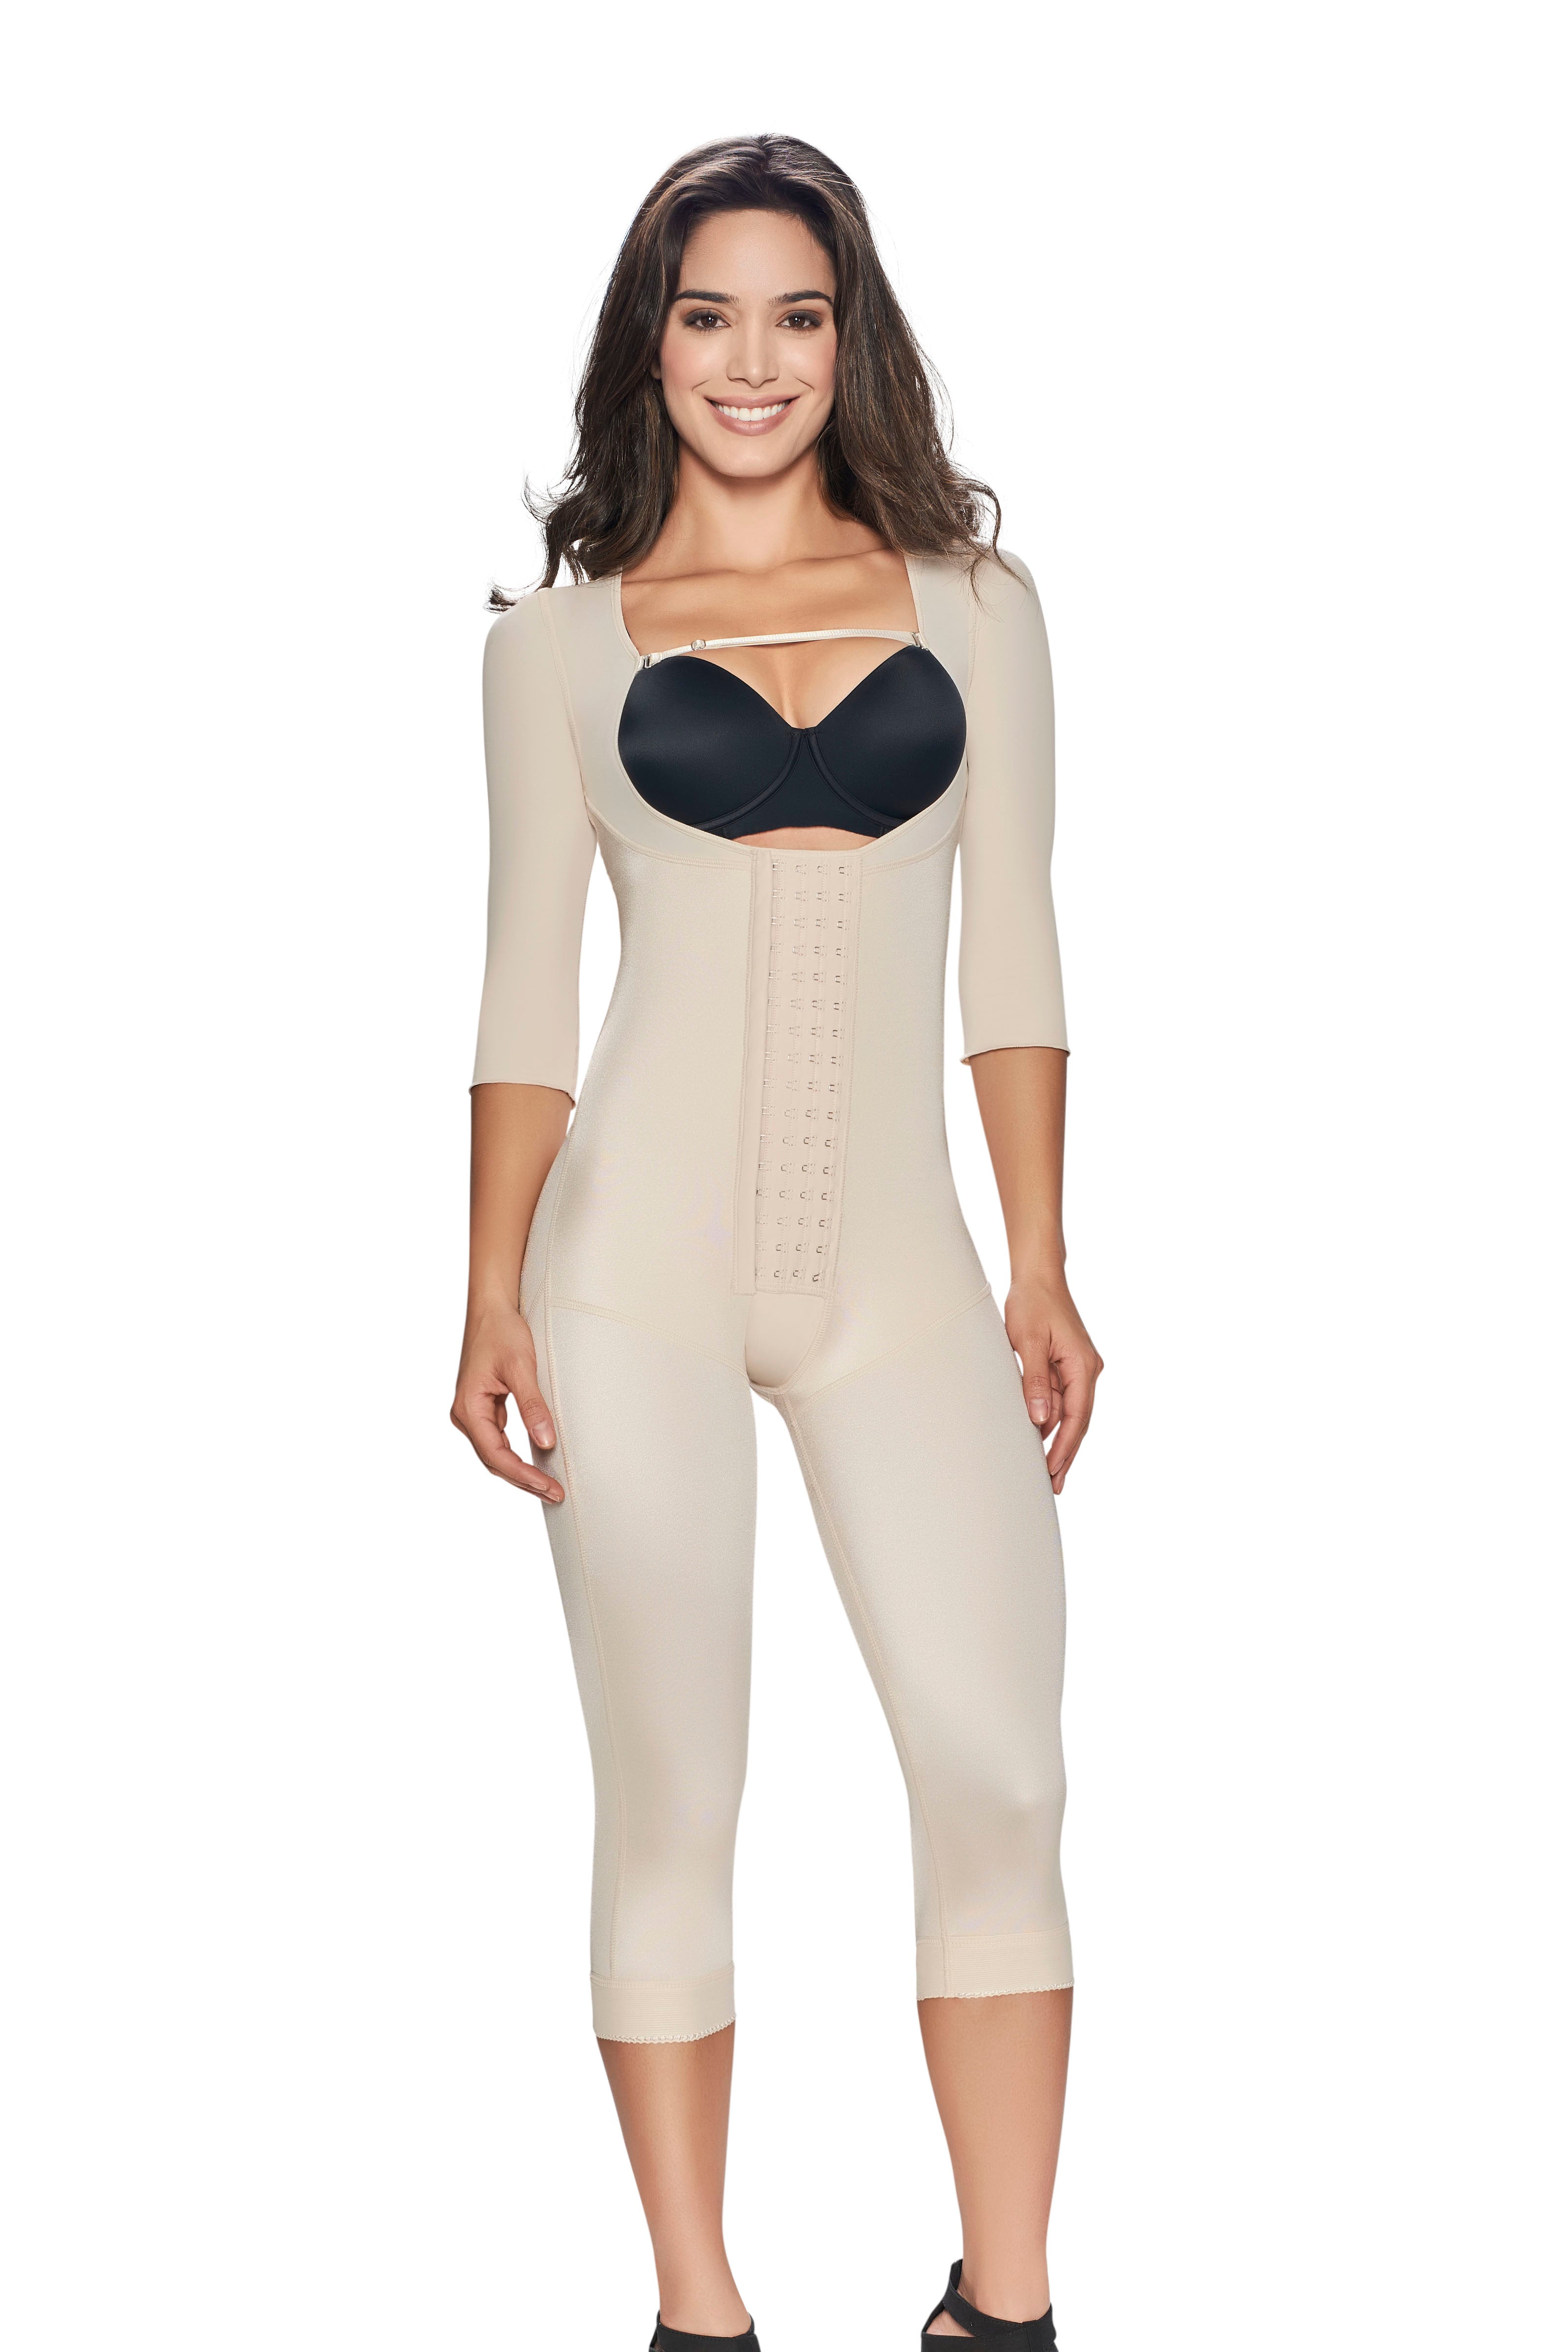 Post Surgical Body Shaper with Arm Compression –